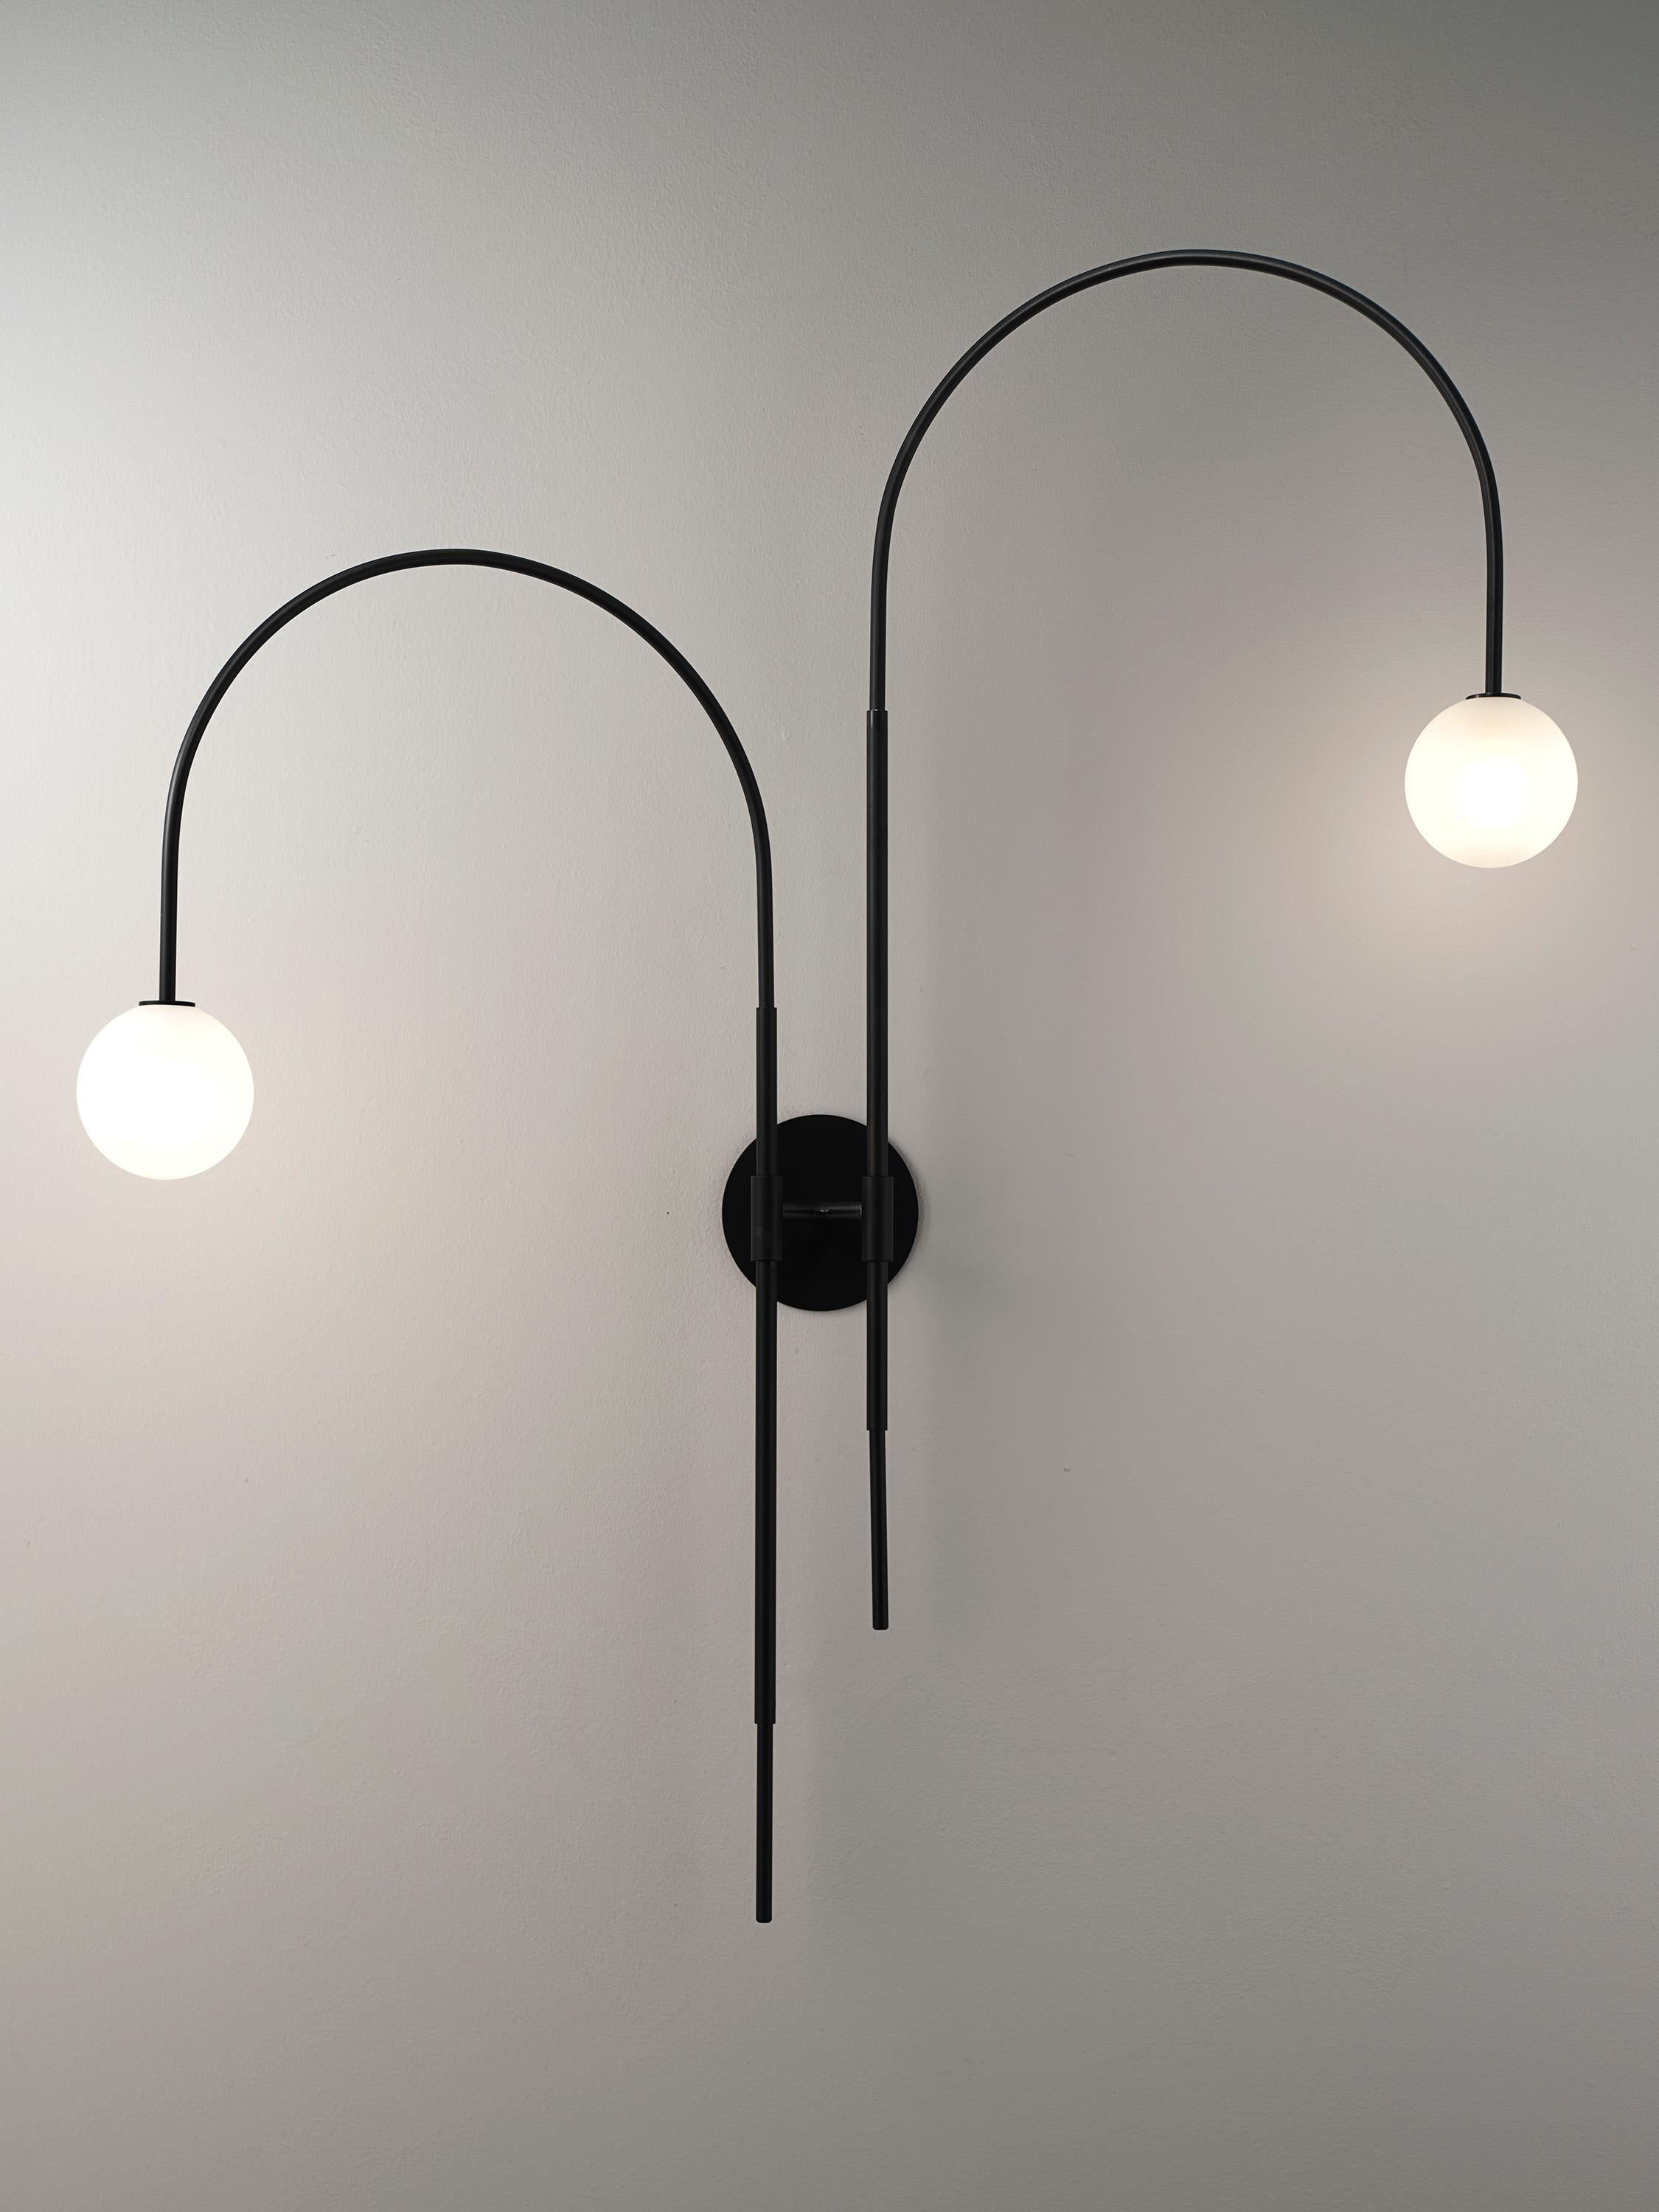 The Double Arc is a dramatically overscaled study in clean lines and simple form inspired by the tenets of the Bauhaus, ARC is truly a go-anywhere design and is equally at home in residential, commercial and hospitality projects. This fixture is